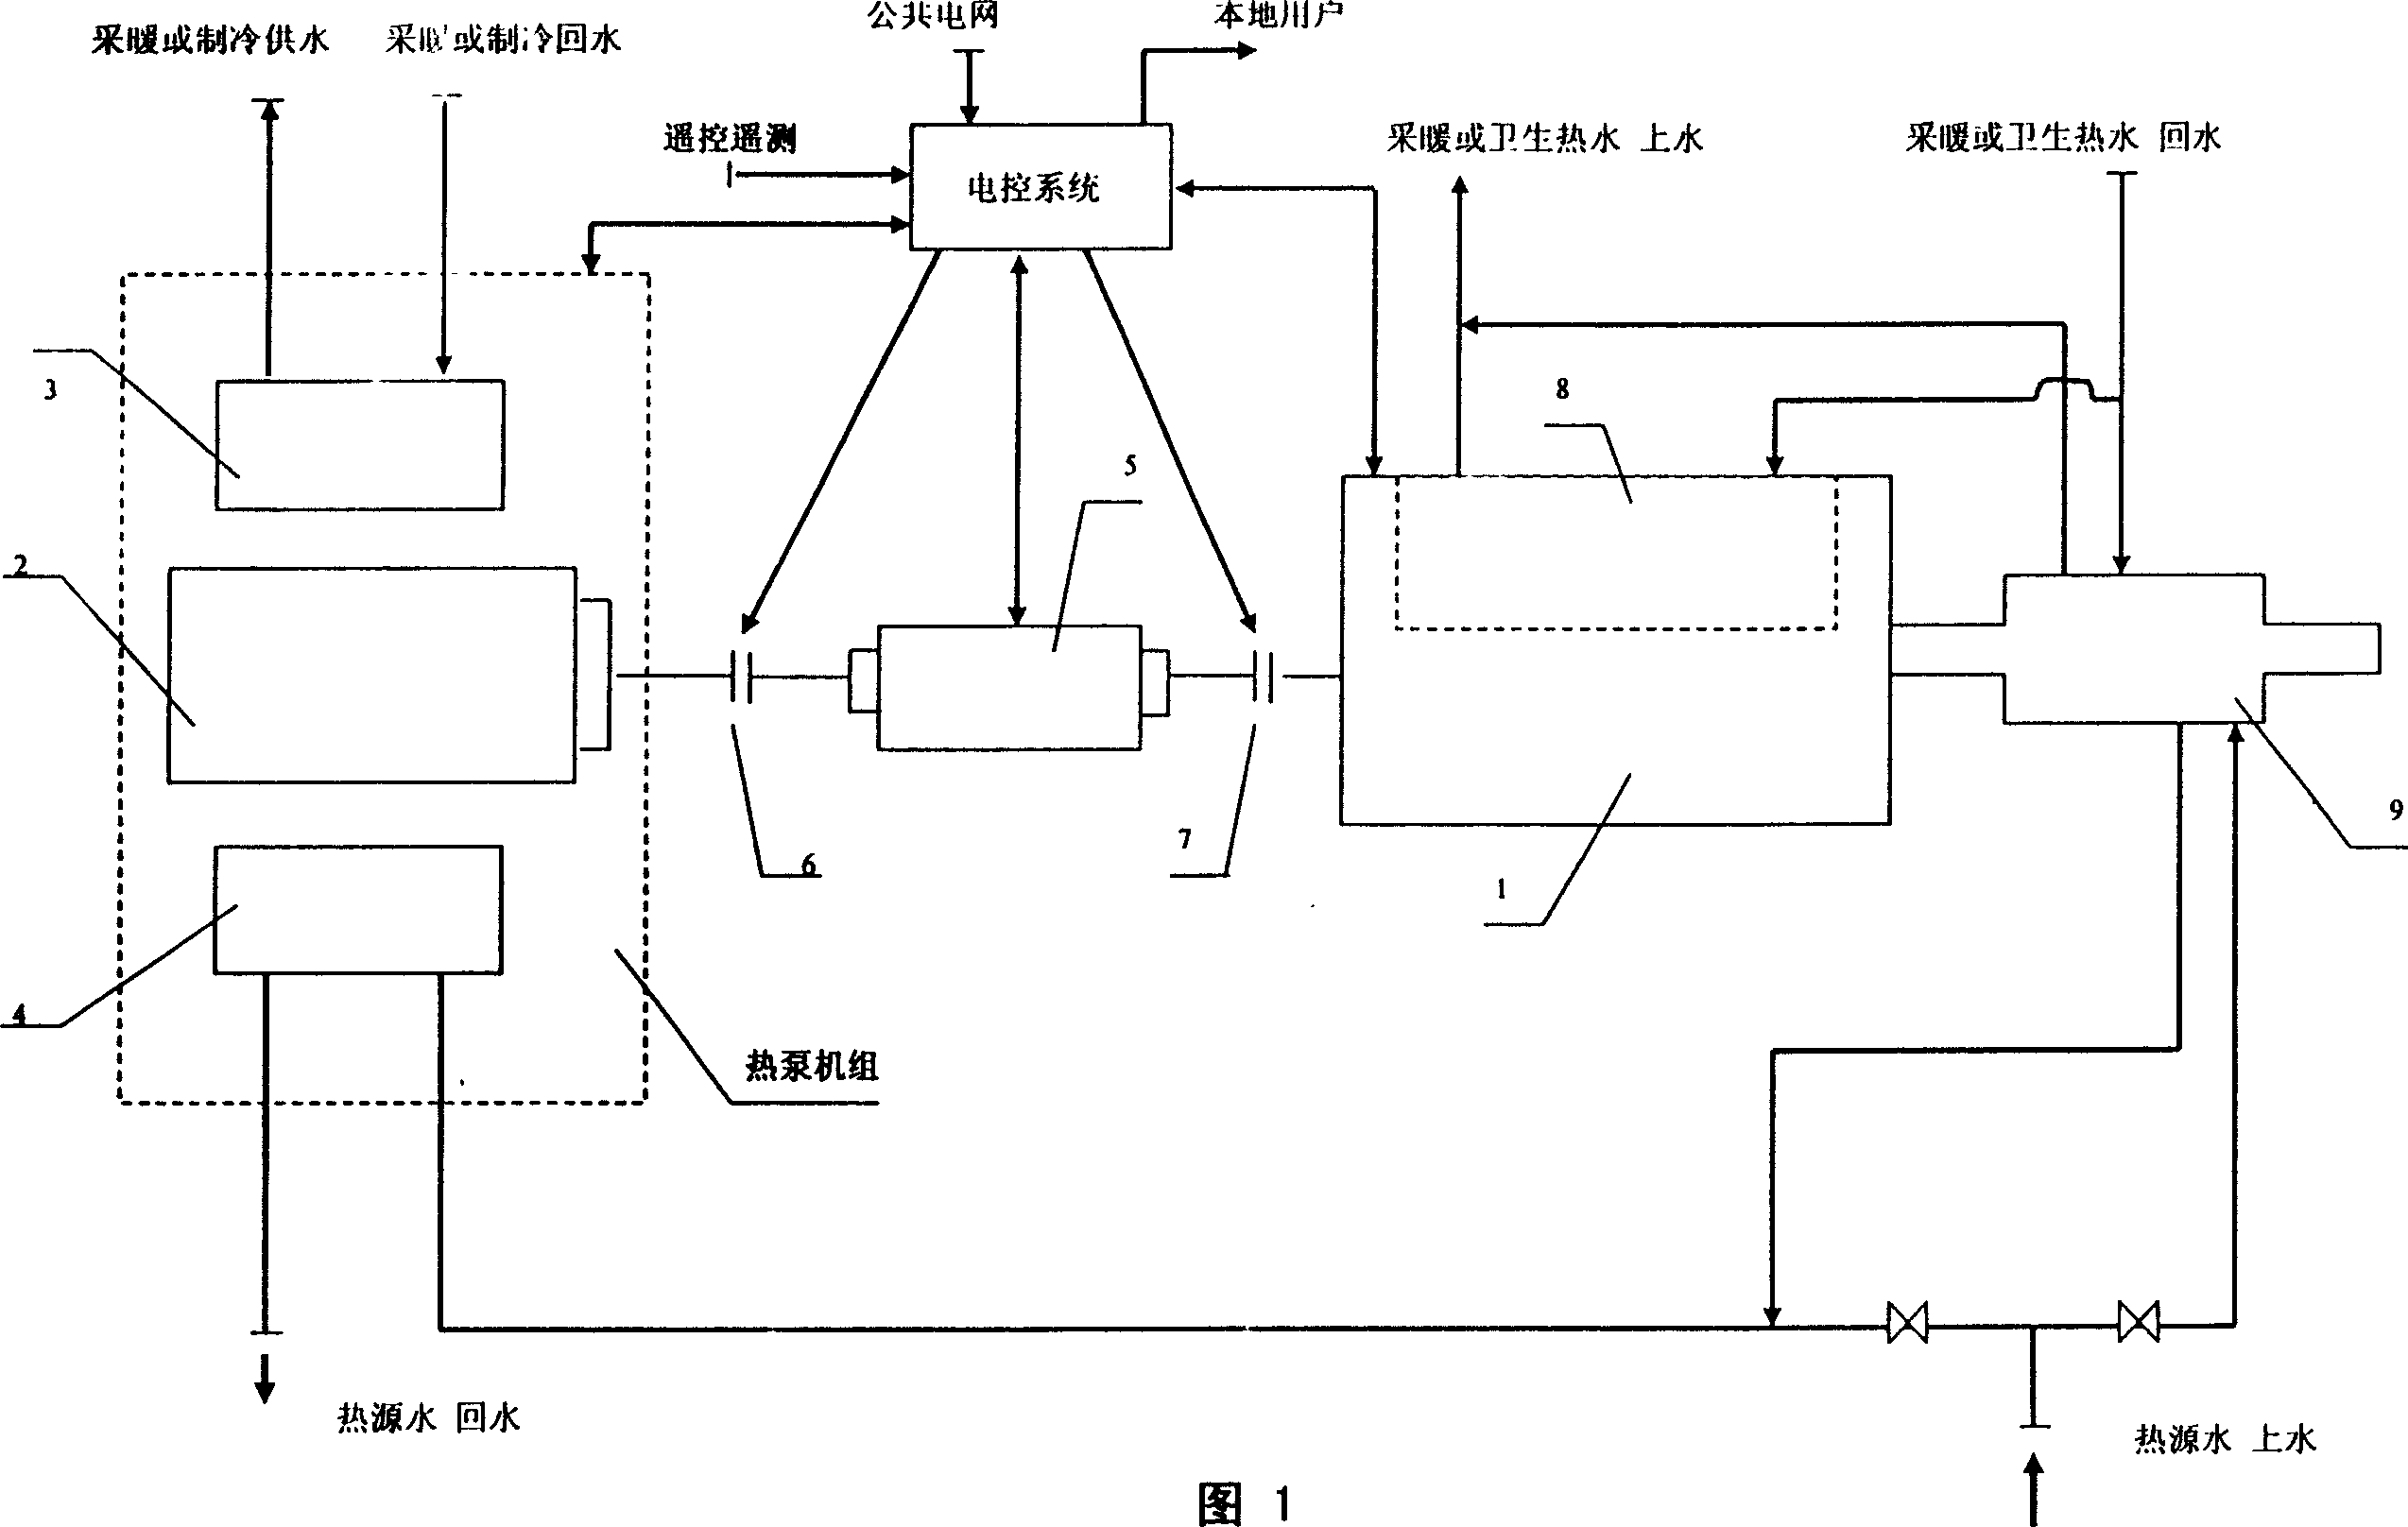 Thermal supplying apparatus with co-shaft of three device connected directly and its use